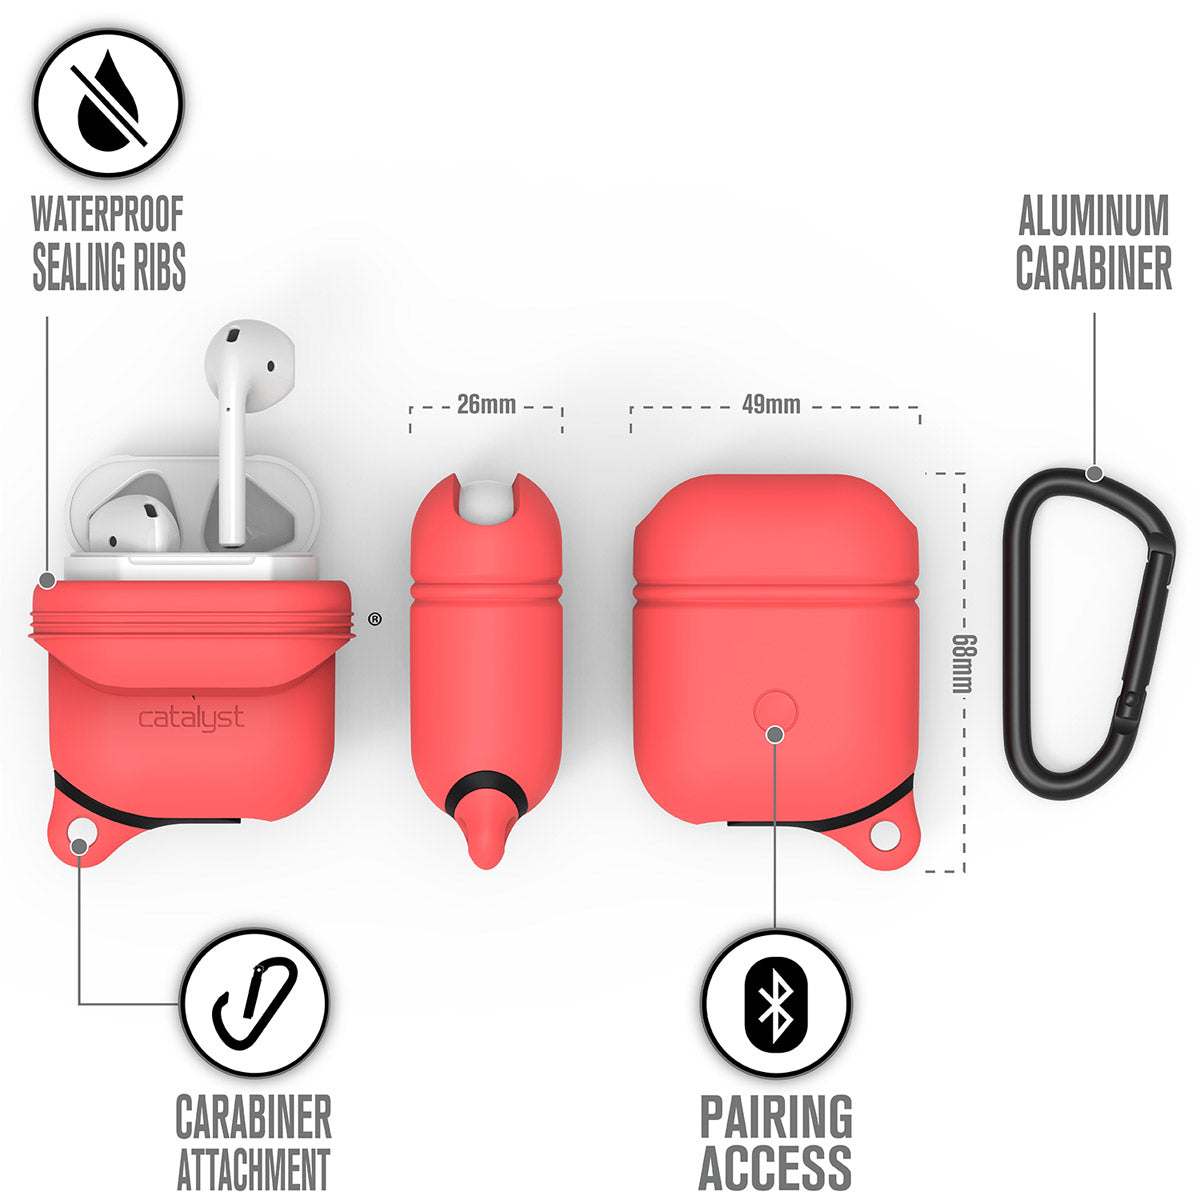 CATAPDCOR | Catalyst airpods gen2/1 waterproof case + carabiner showing the case dimension and features in coral text reads waterproof sealing ribs aluminum carabiner pairing access carabiner attachment